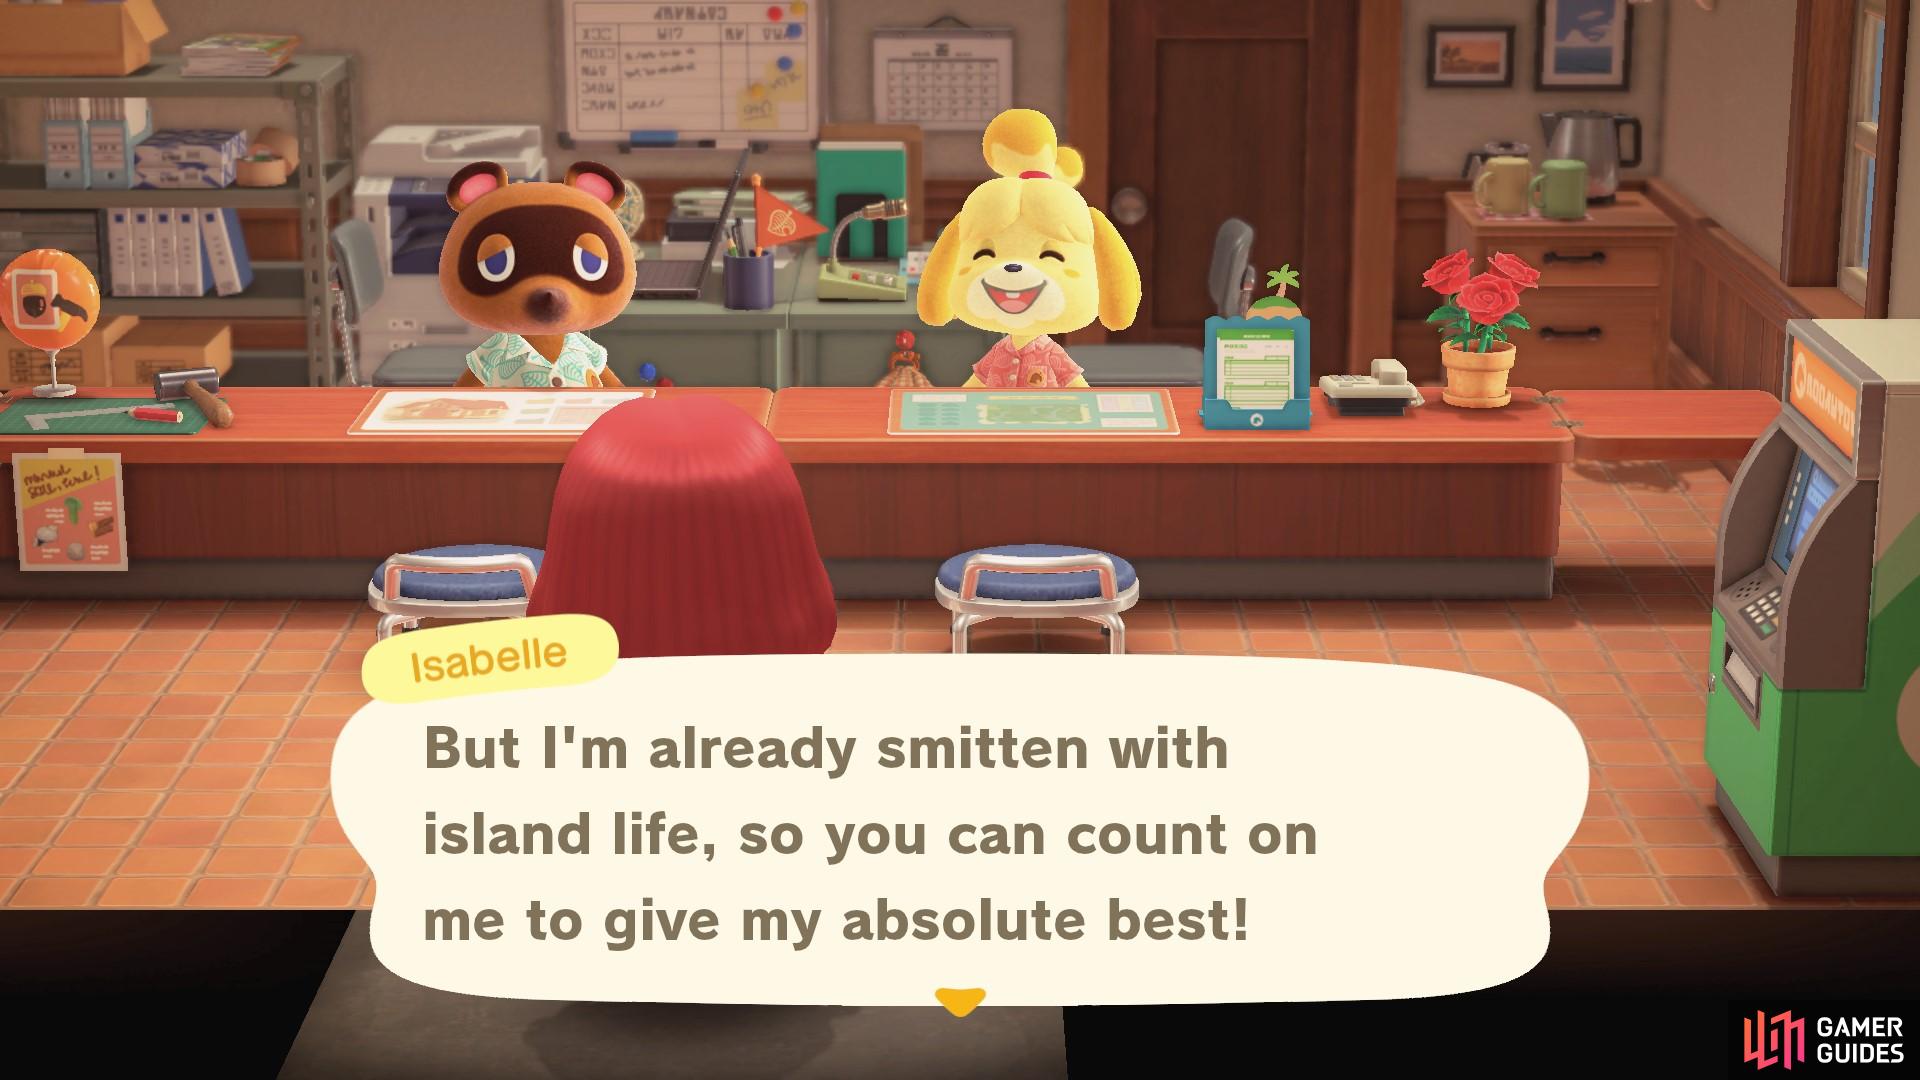 Isabelle is here to help with your island needs!